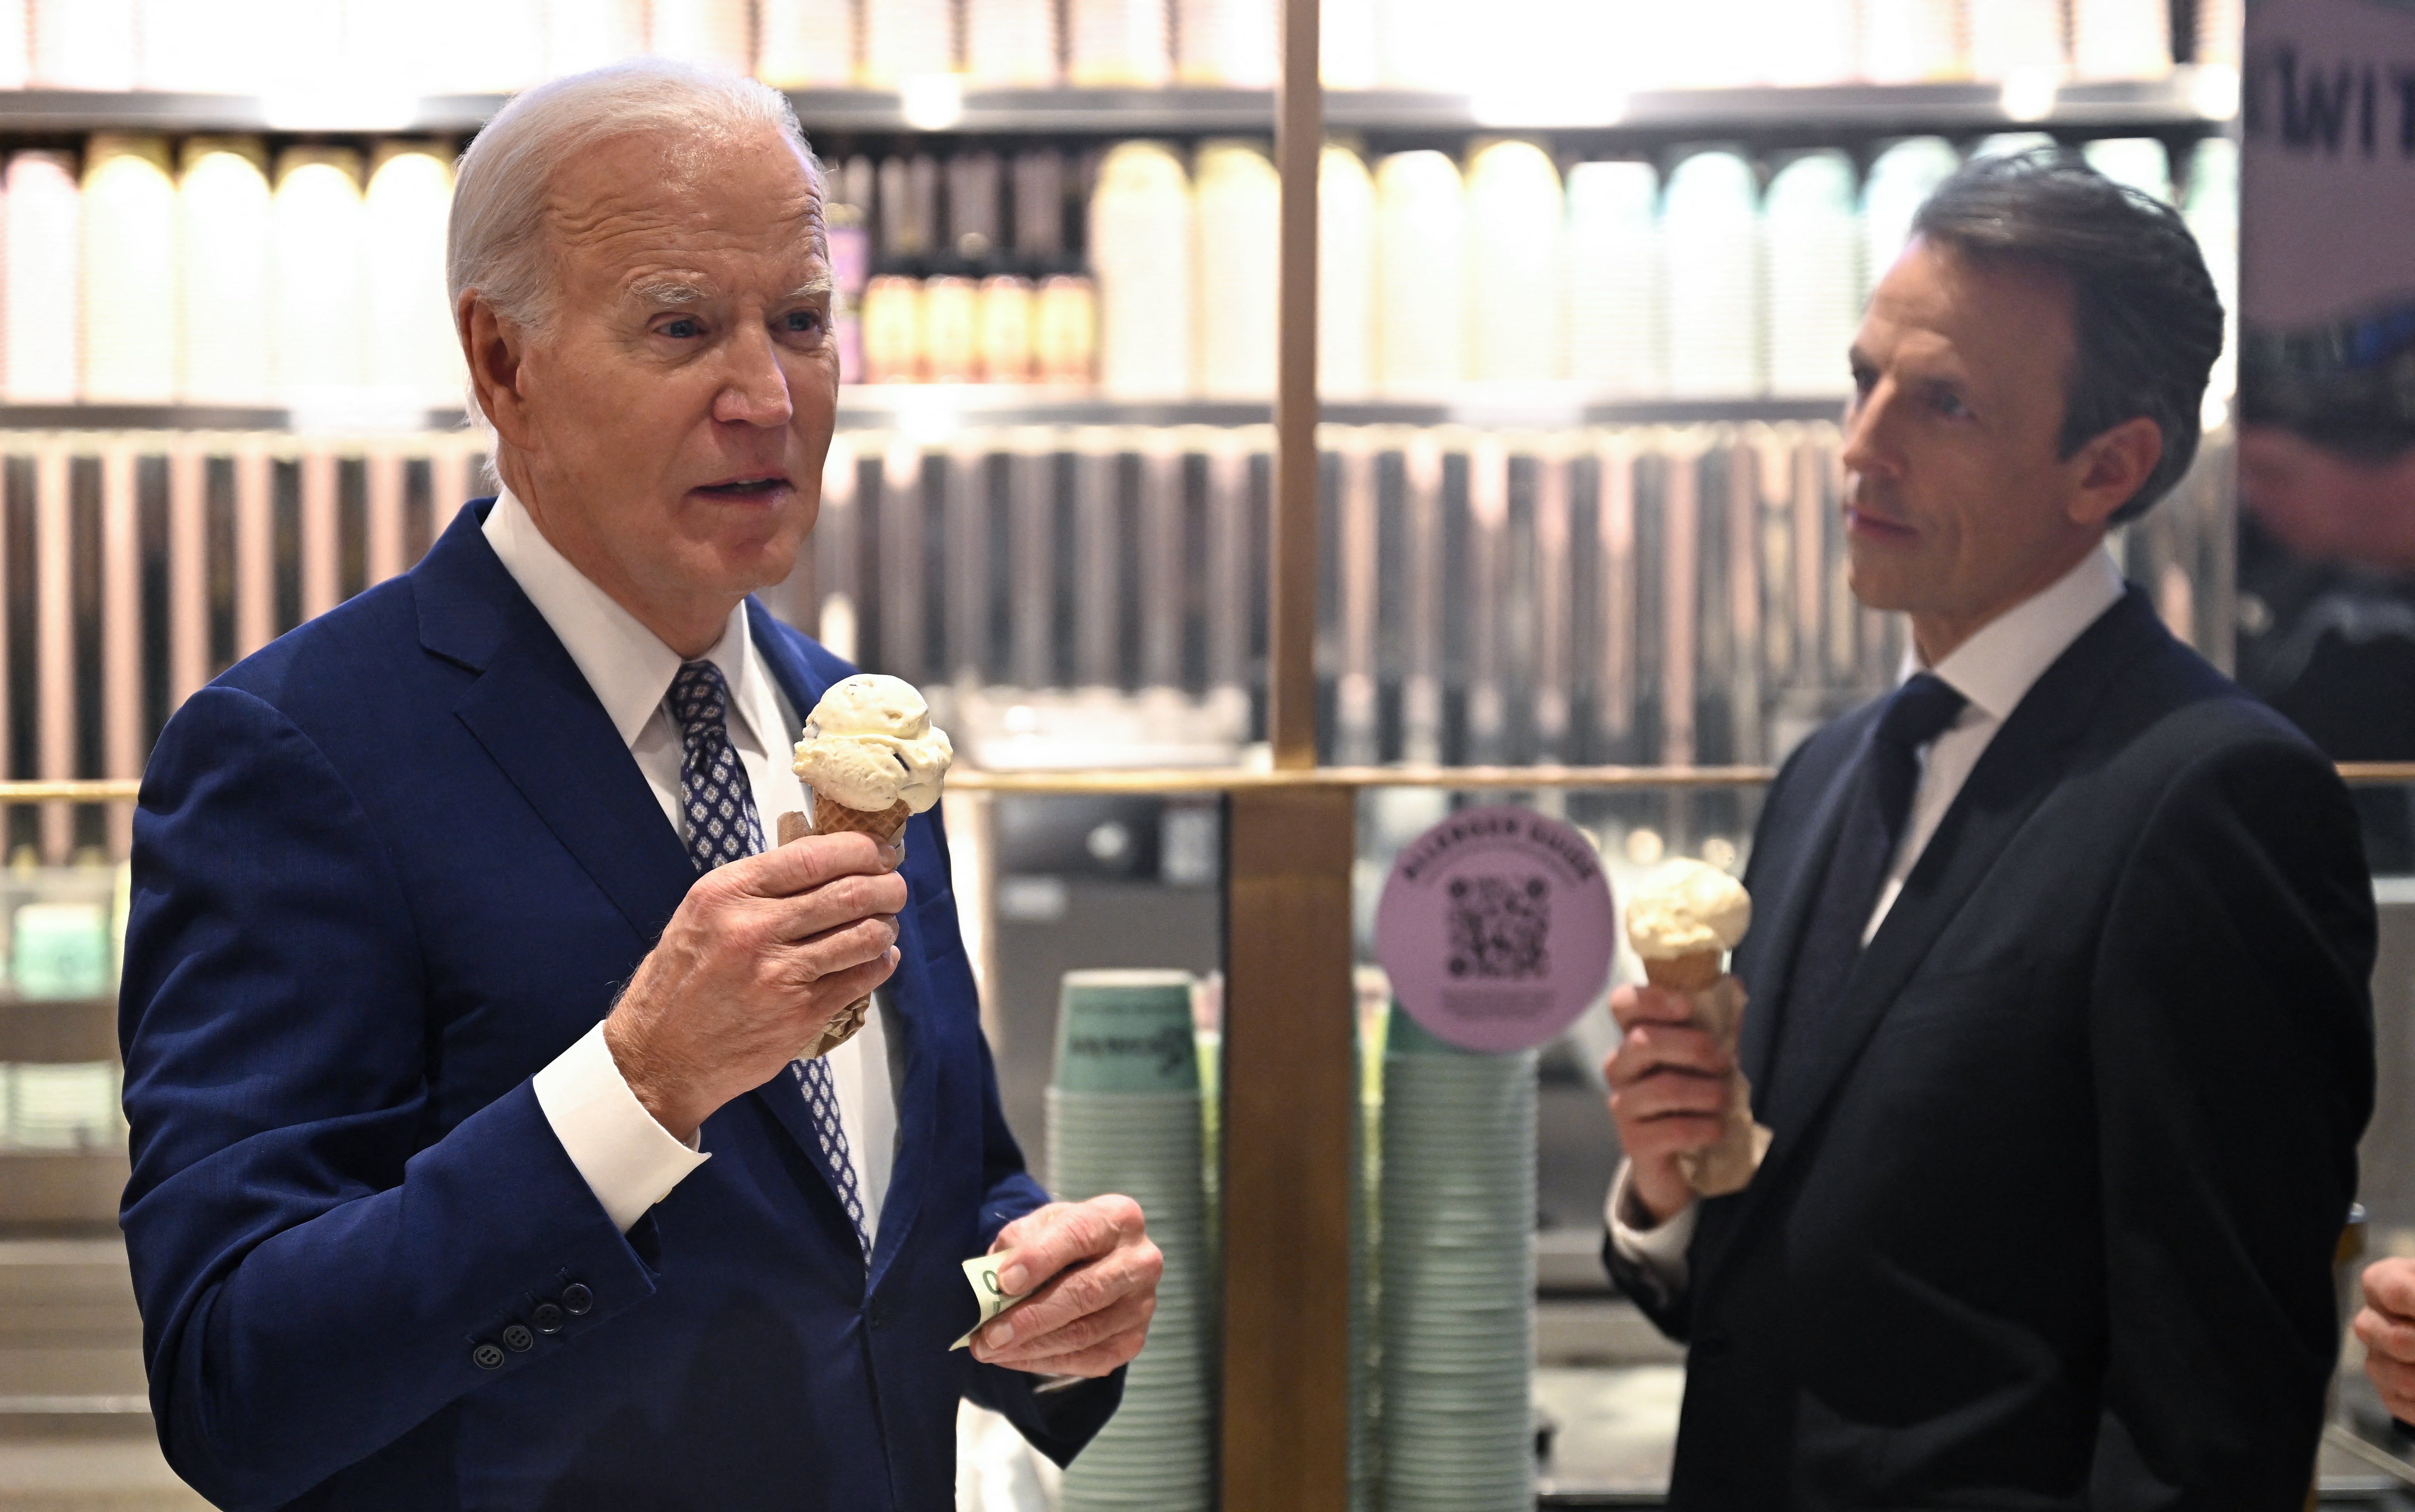 Joe Biden was questioned about a ceasefire while eating ice cream with Seth Meyers